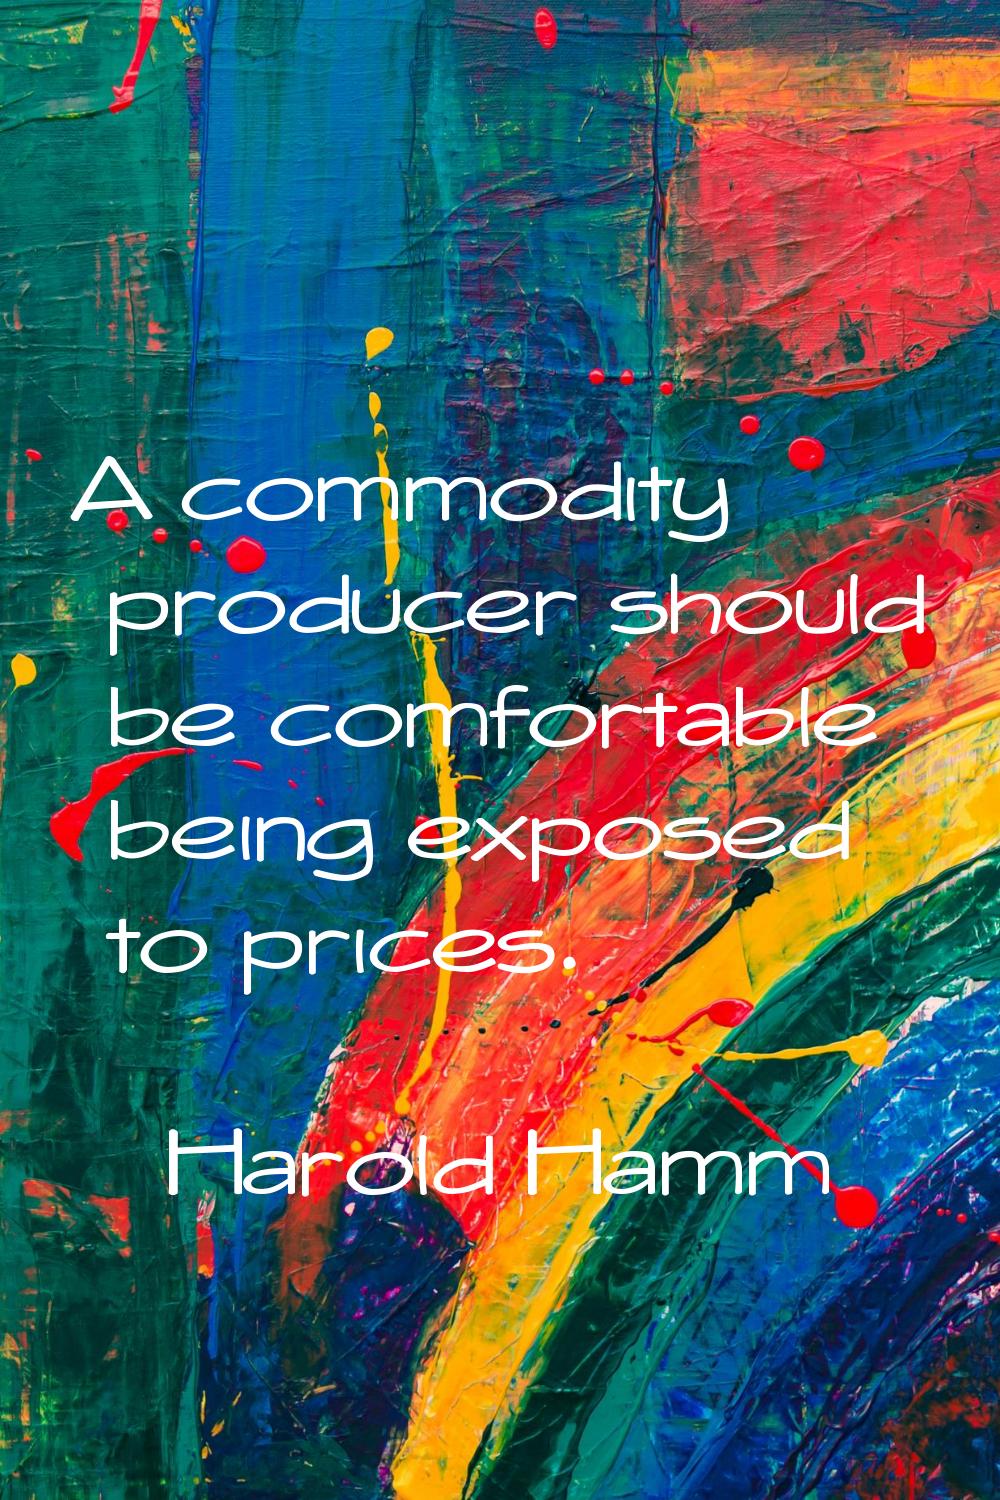 A commodity producer should be comfortable being exposed to prices.